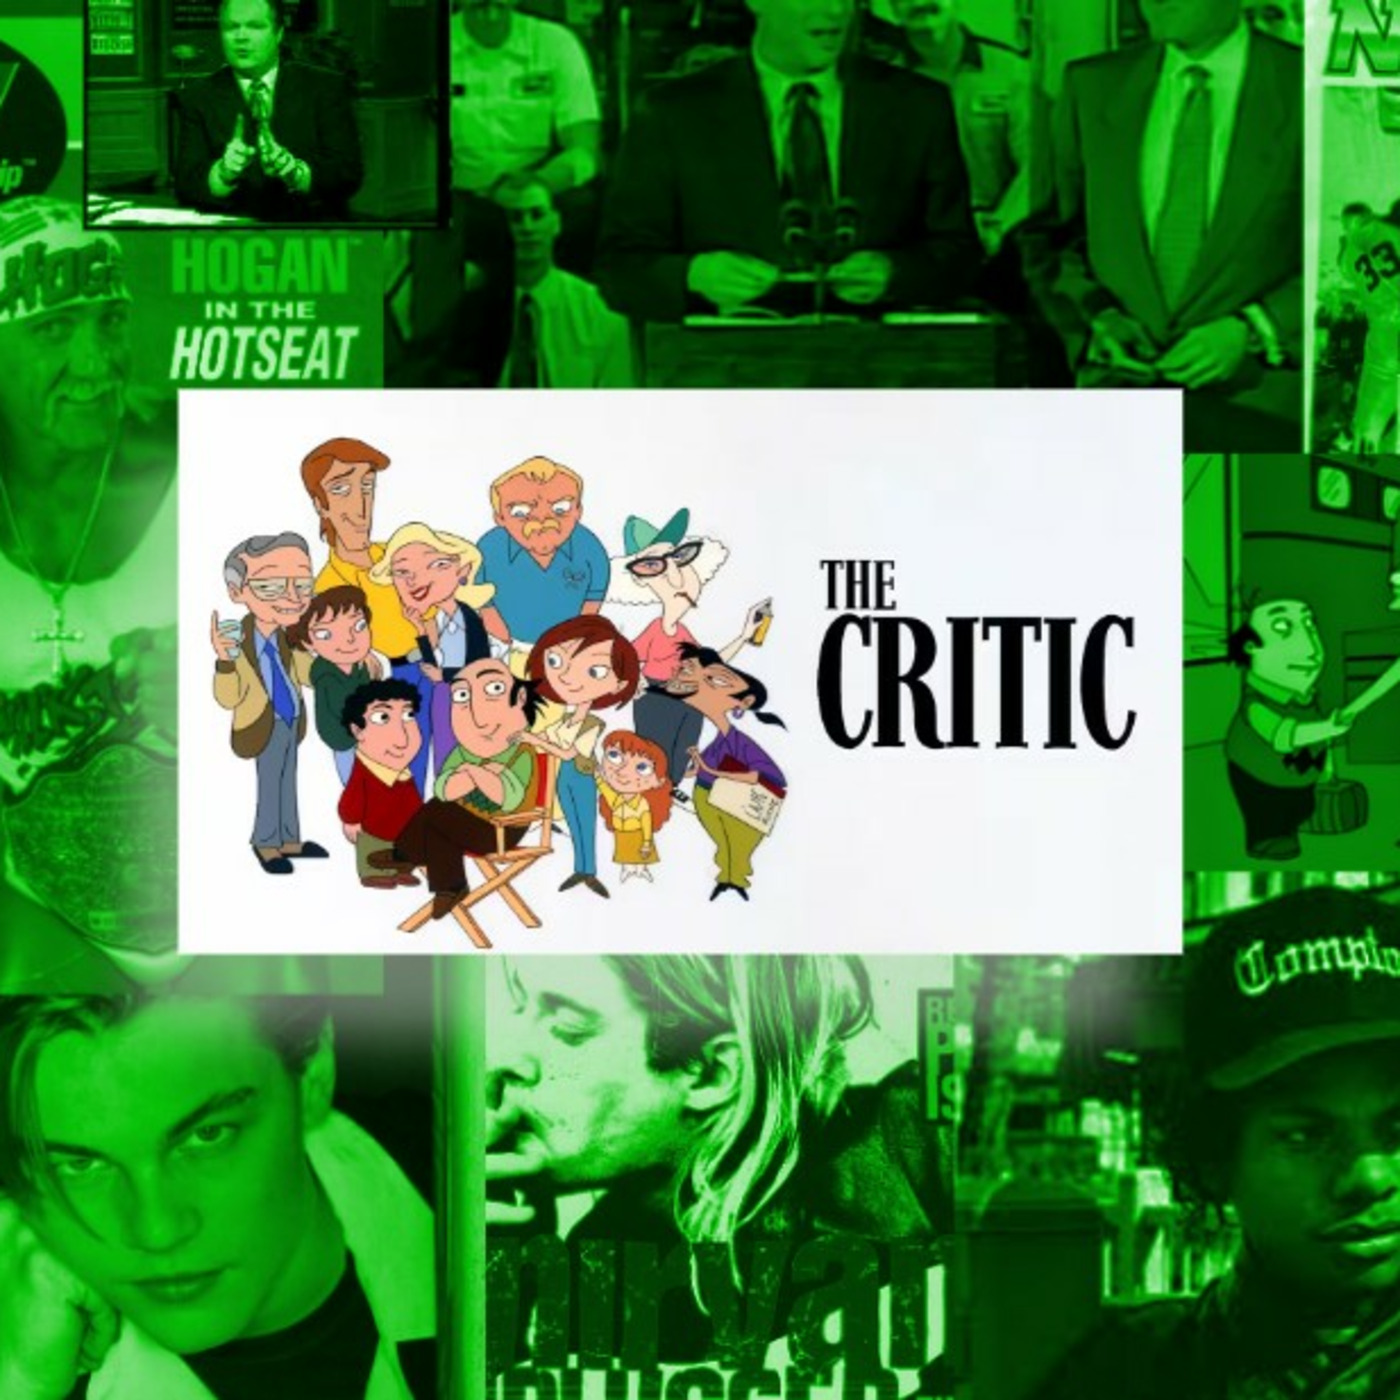 Episode 24: The Critic (1994-1995)